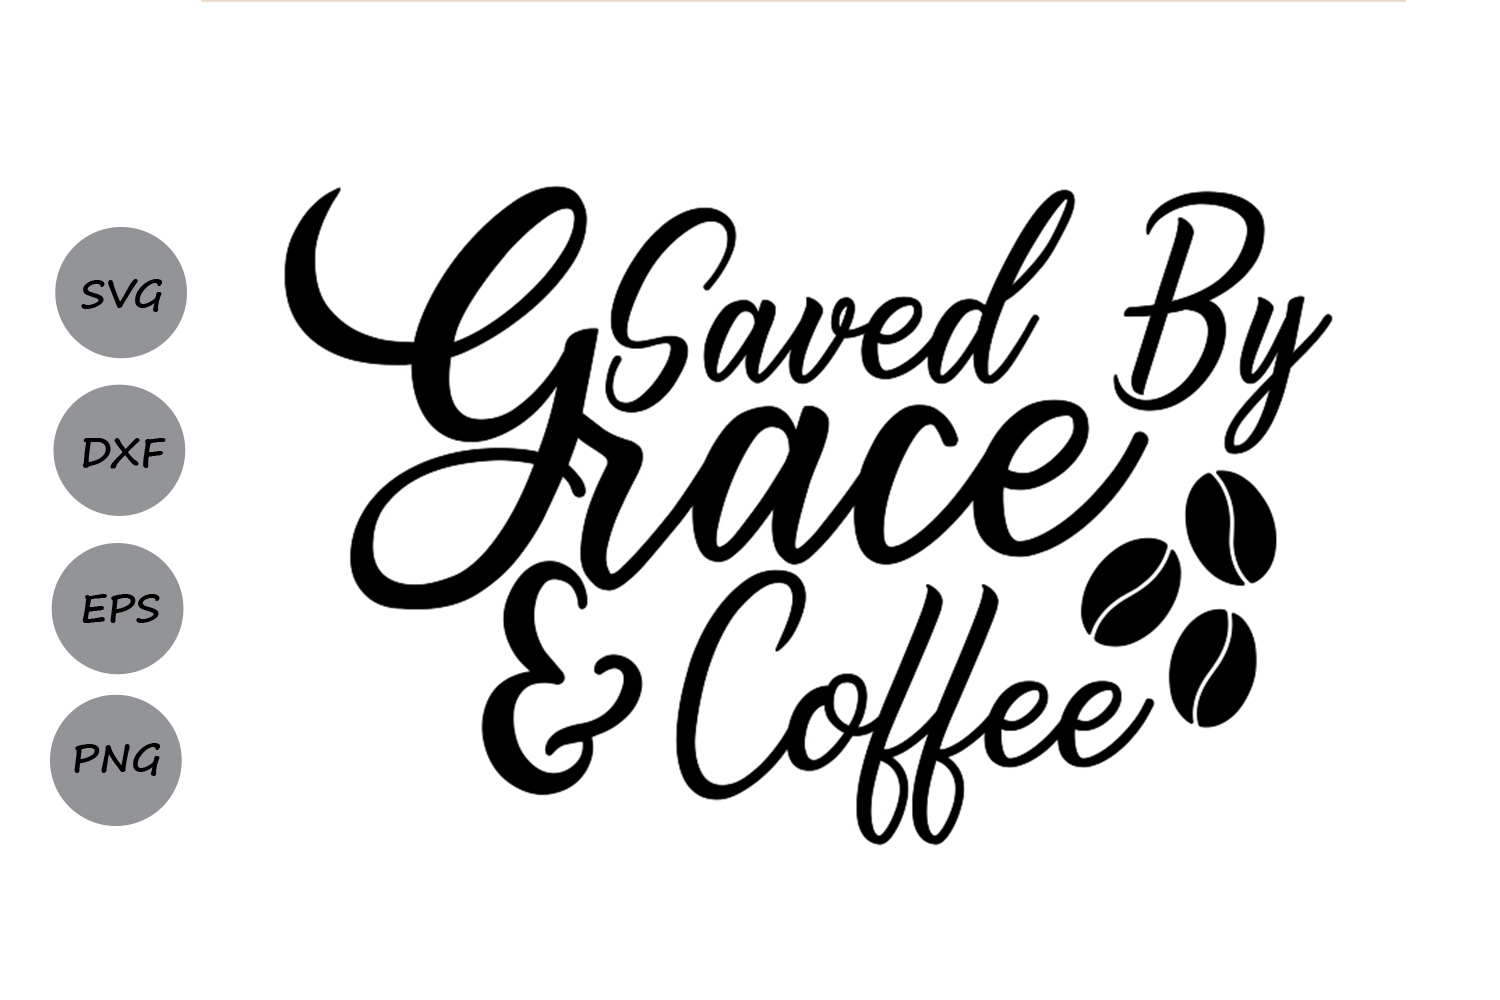 Download Saved By Grace and Coffee Svg, Christian Svg, Coffee Svg ...